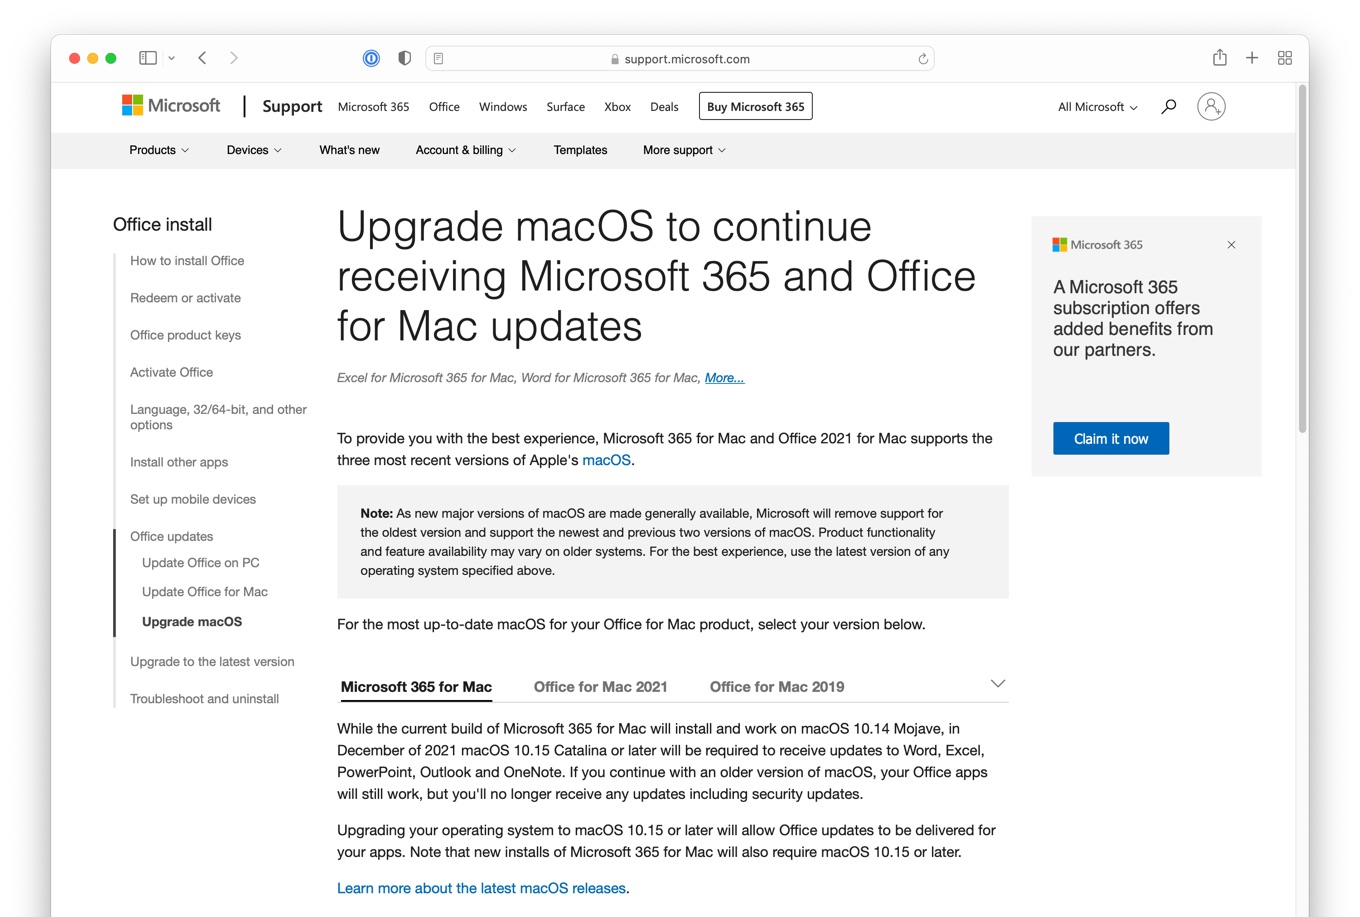 Microsoft Office 365 for Mac drop support macOS 10.14 Mojave